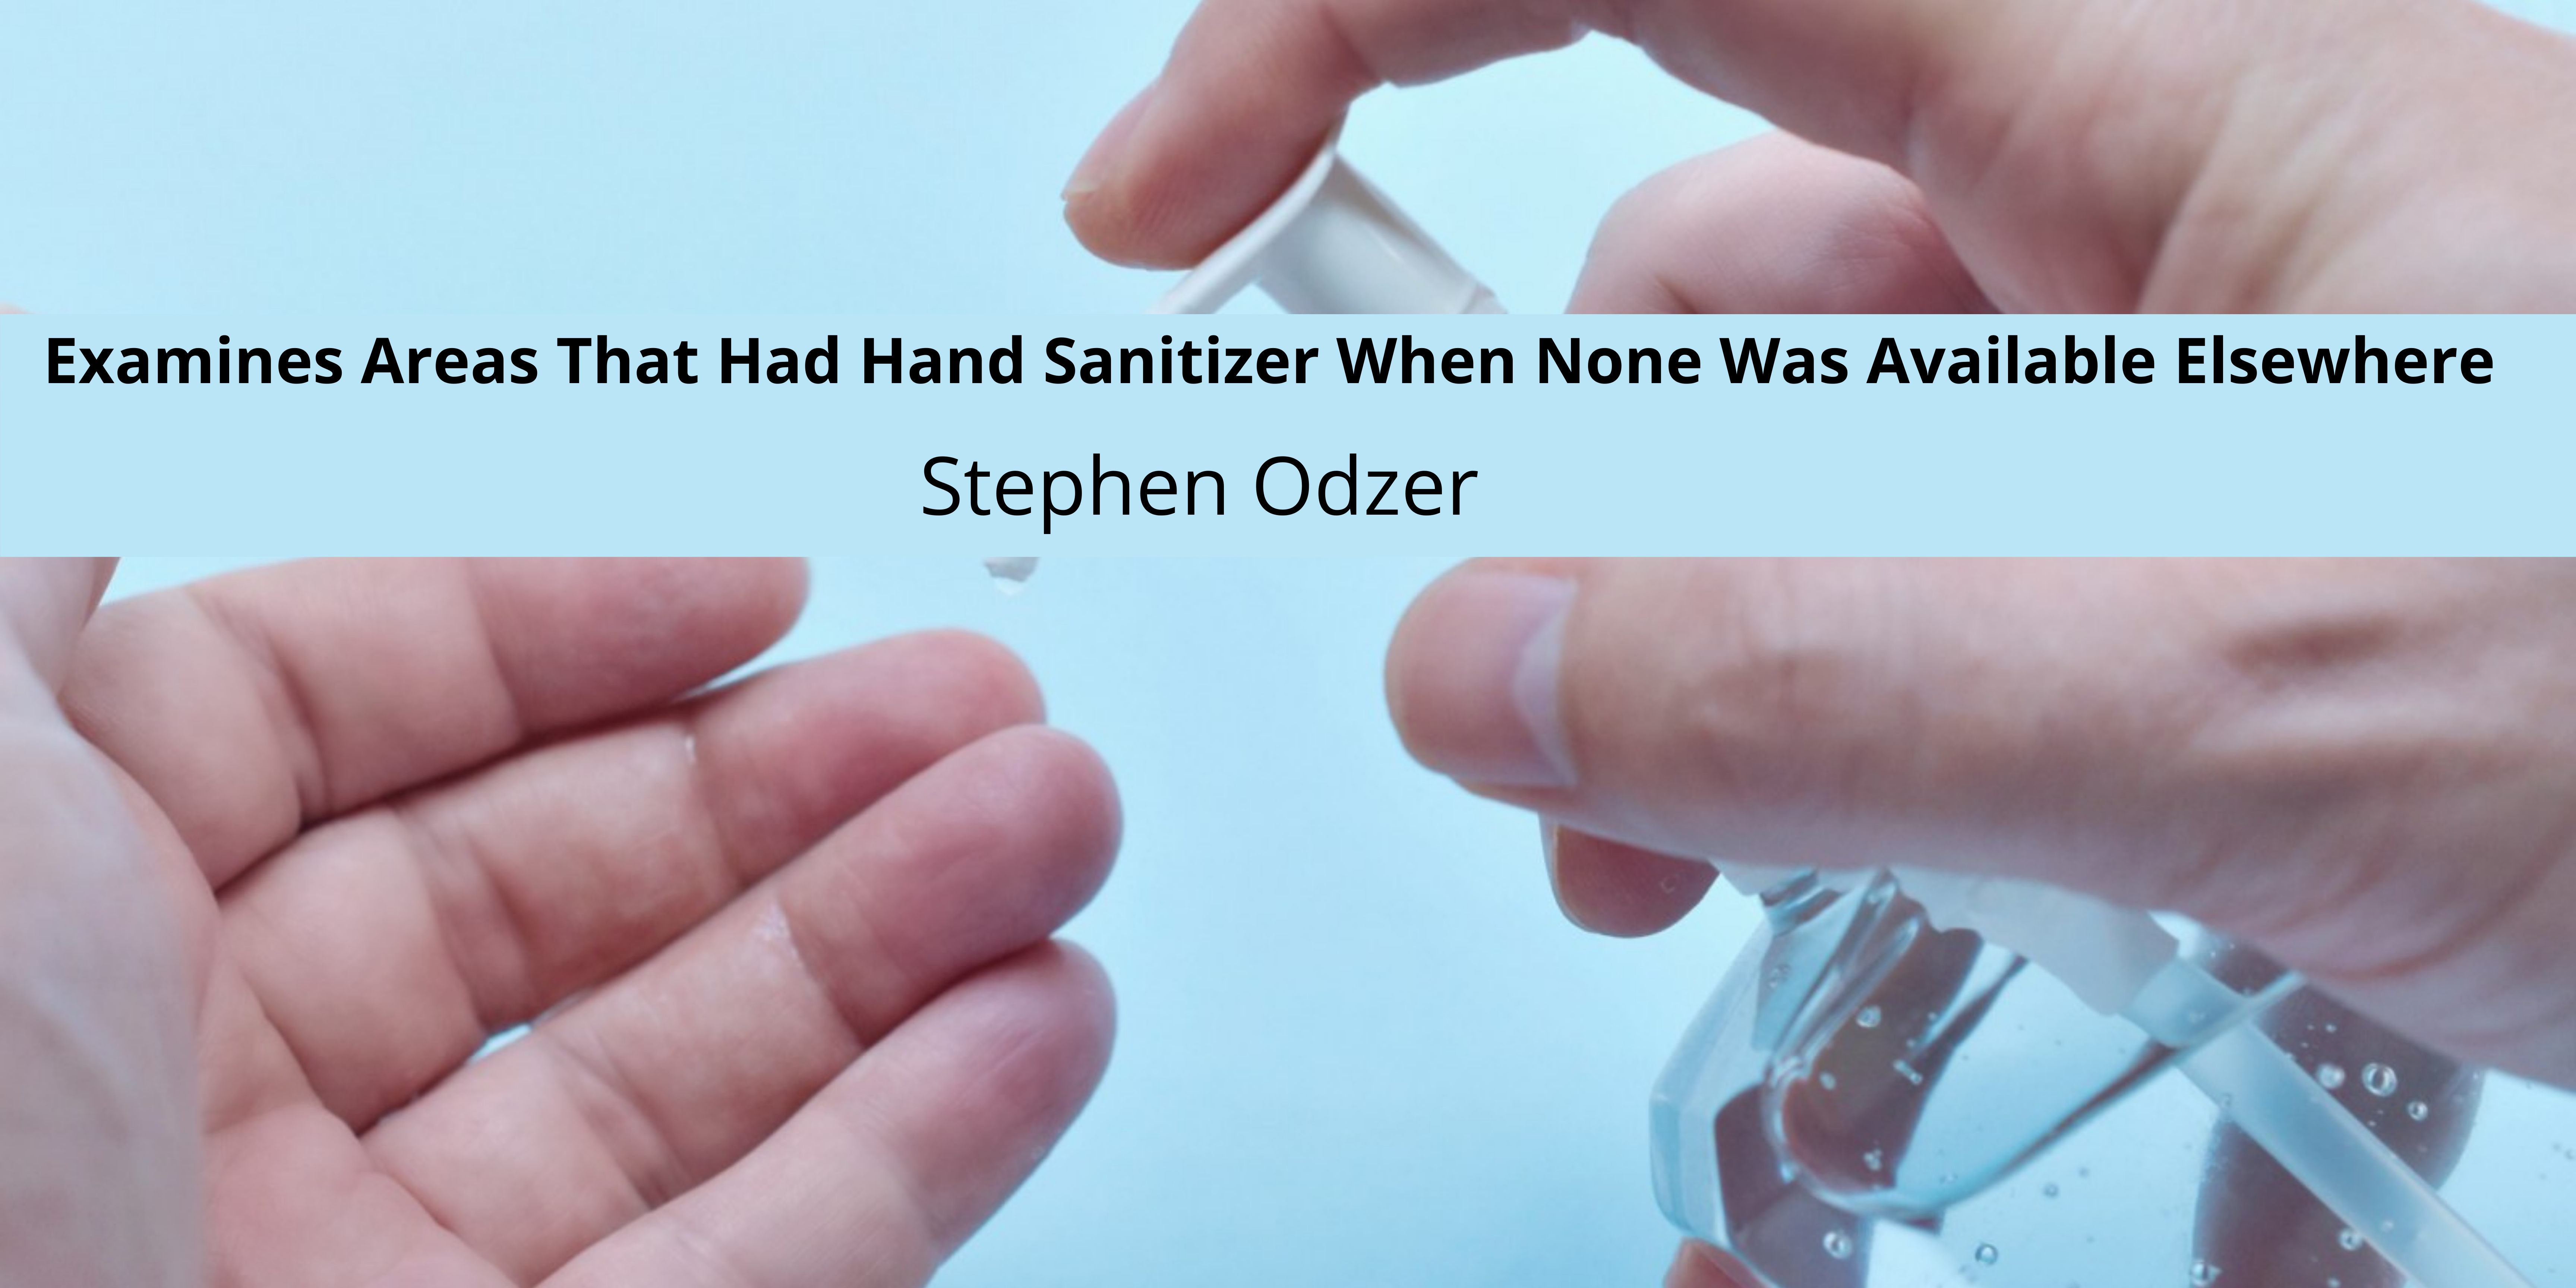 Examines Areas That Had Hand Sanitizer When None Was Available Elsewhere